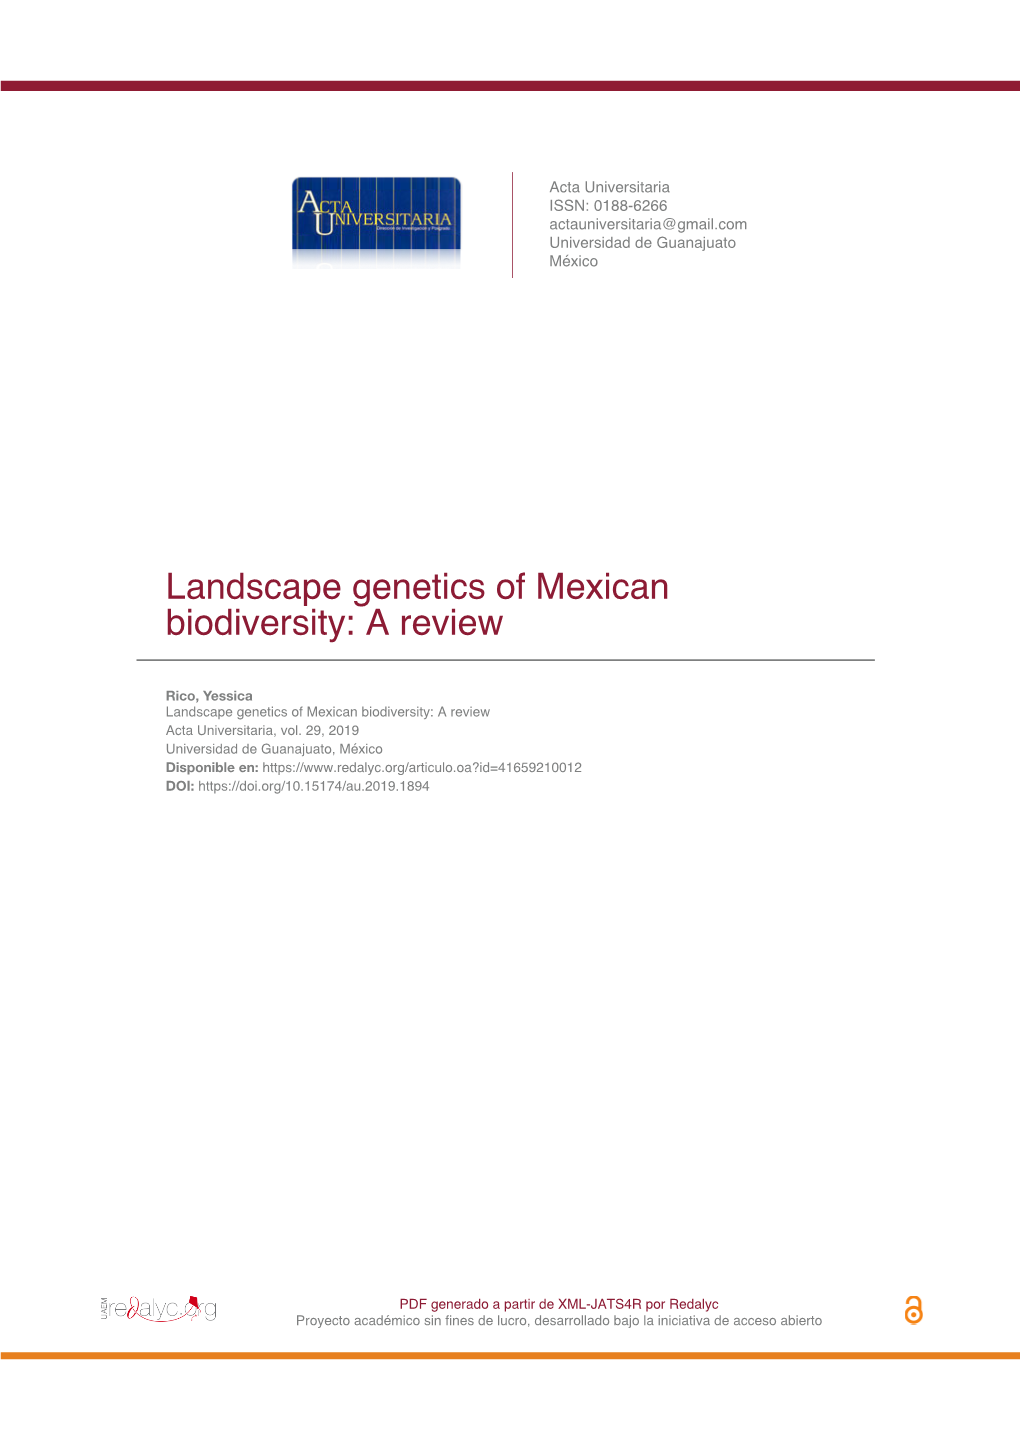 Landscape Genetics of Mexican Biodiversity: a Review